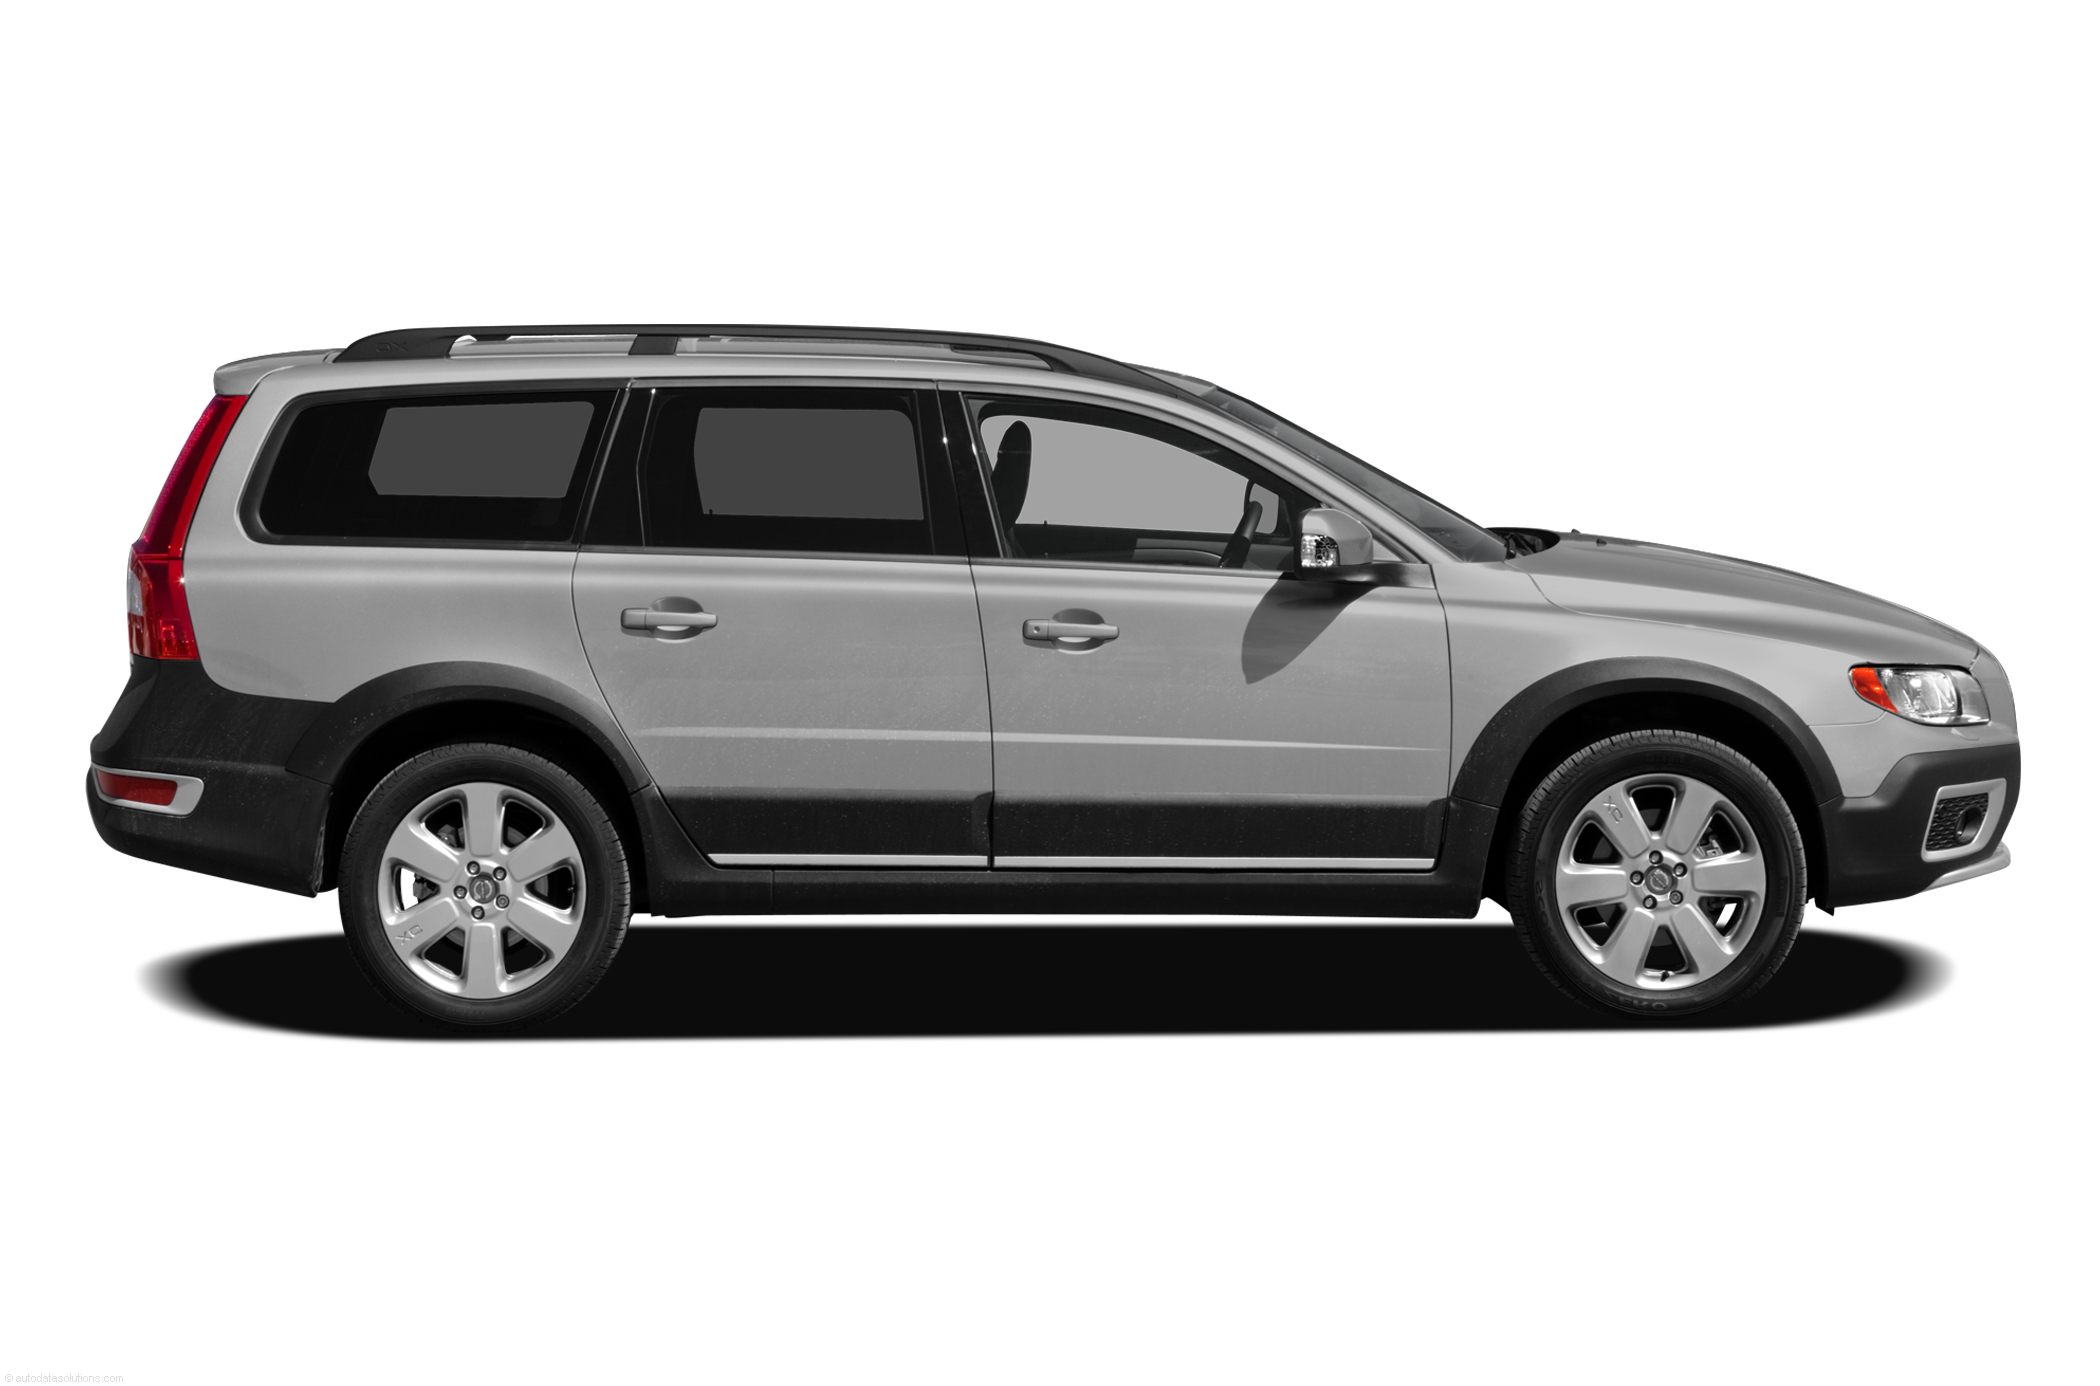 Volvo XC 70 26 T AWD. View Download Wallpaper. 2100x1386. Comments